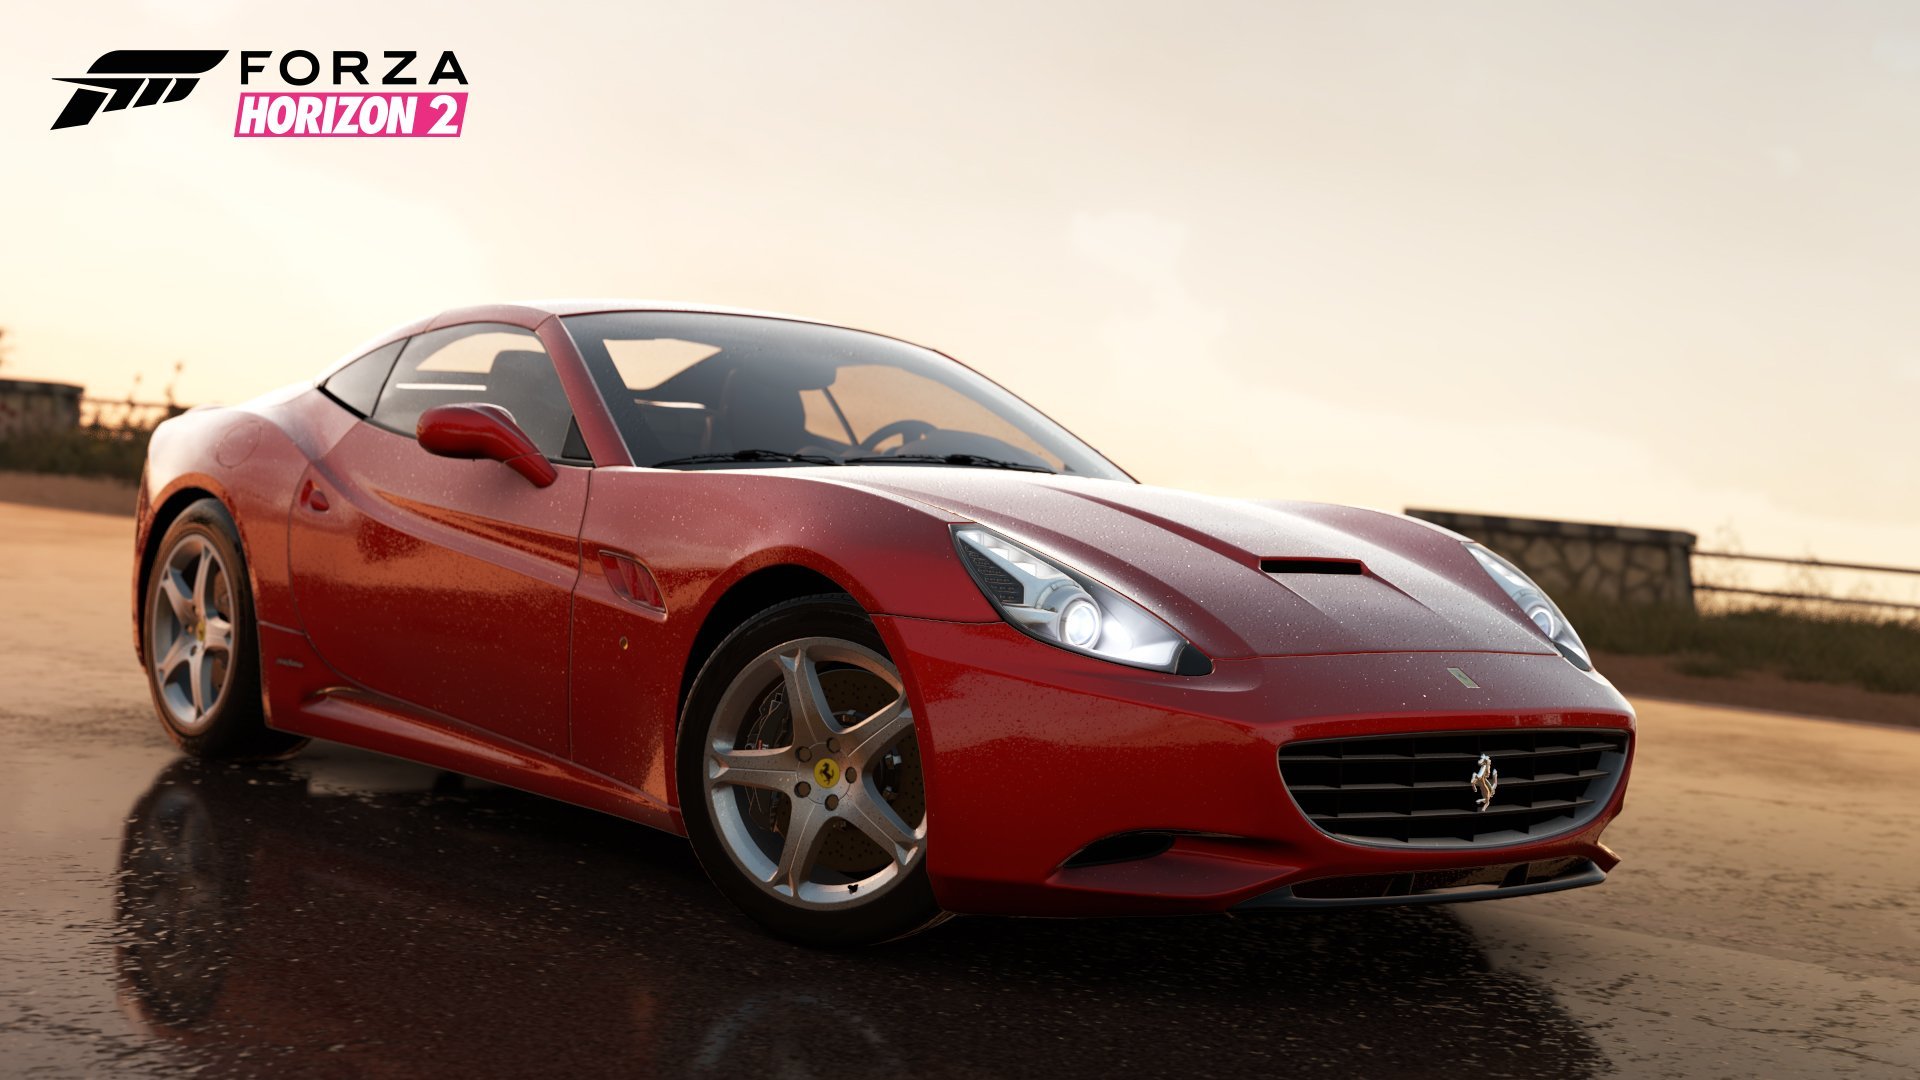 Awesome Forza Horizon 2 free wallpaper ID:69497 for hd 1920x1080 computer